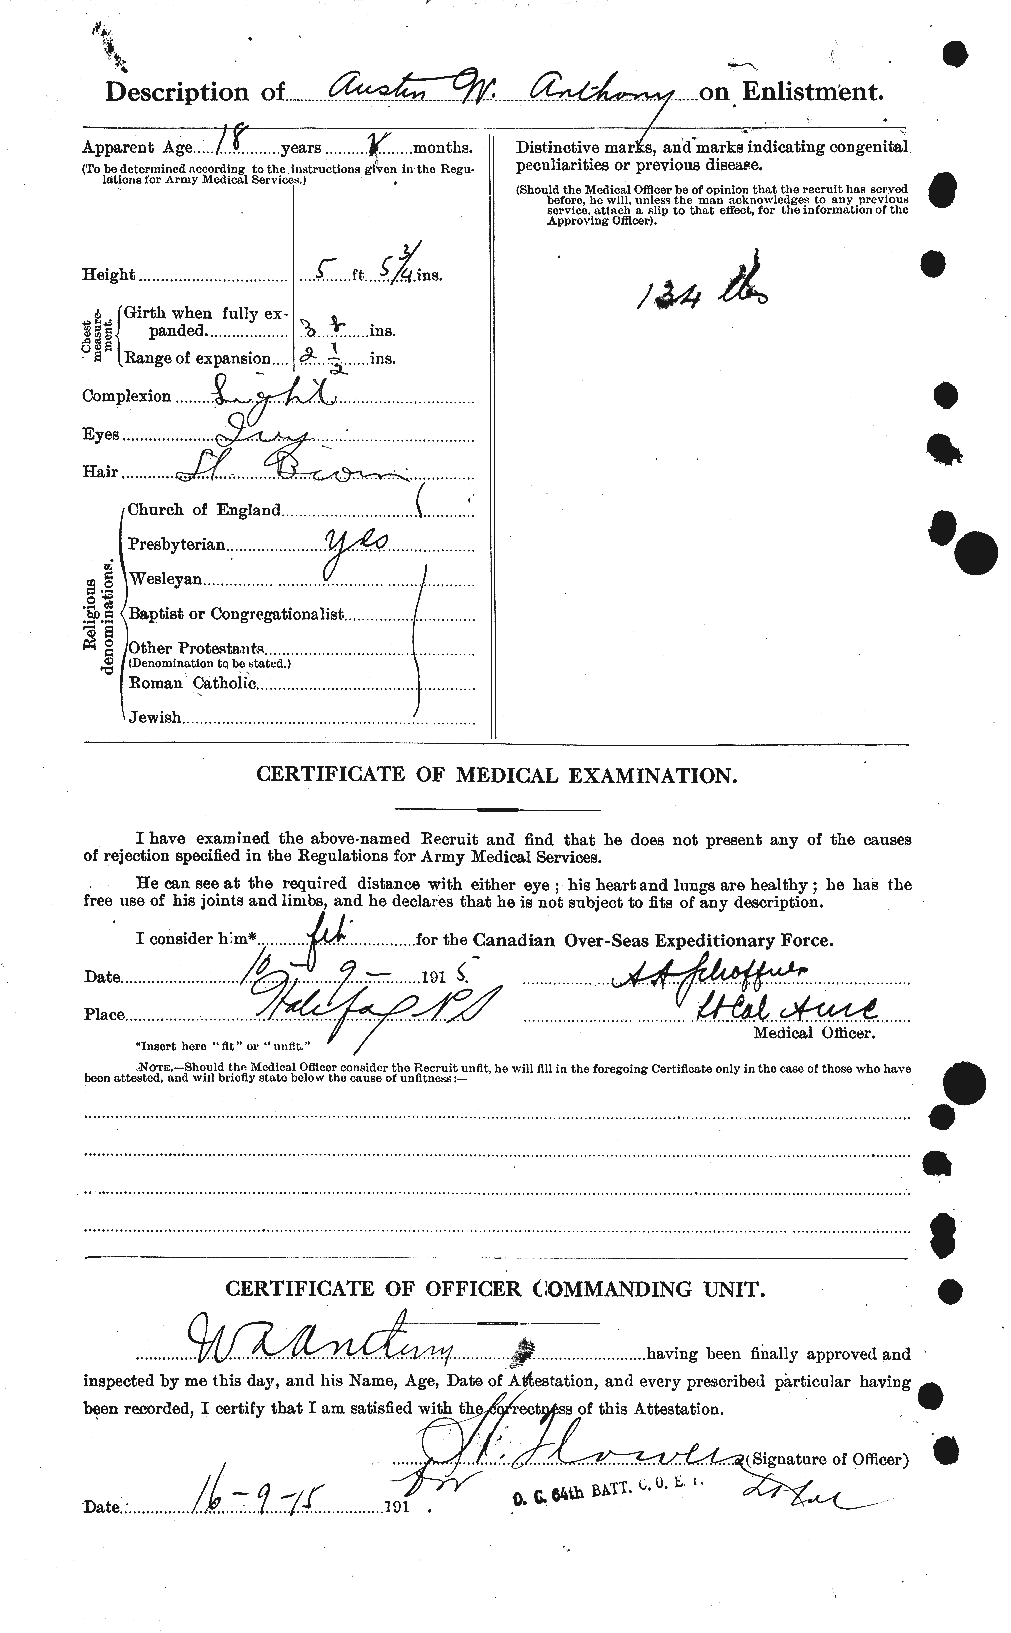 Personnel Records of the First World War - CEF 212236b